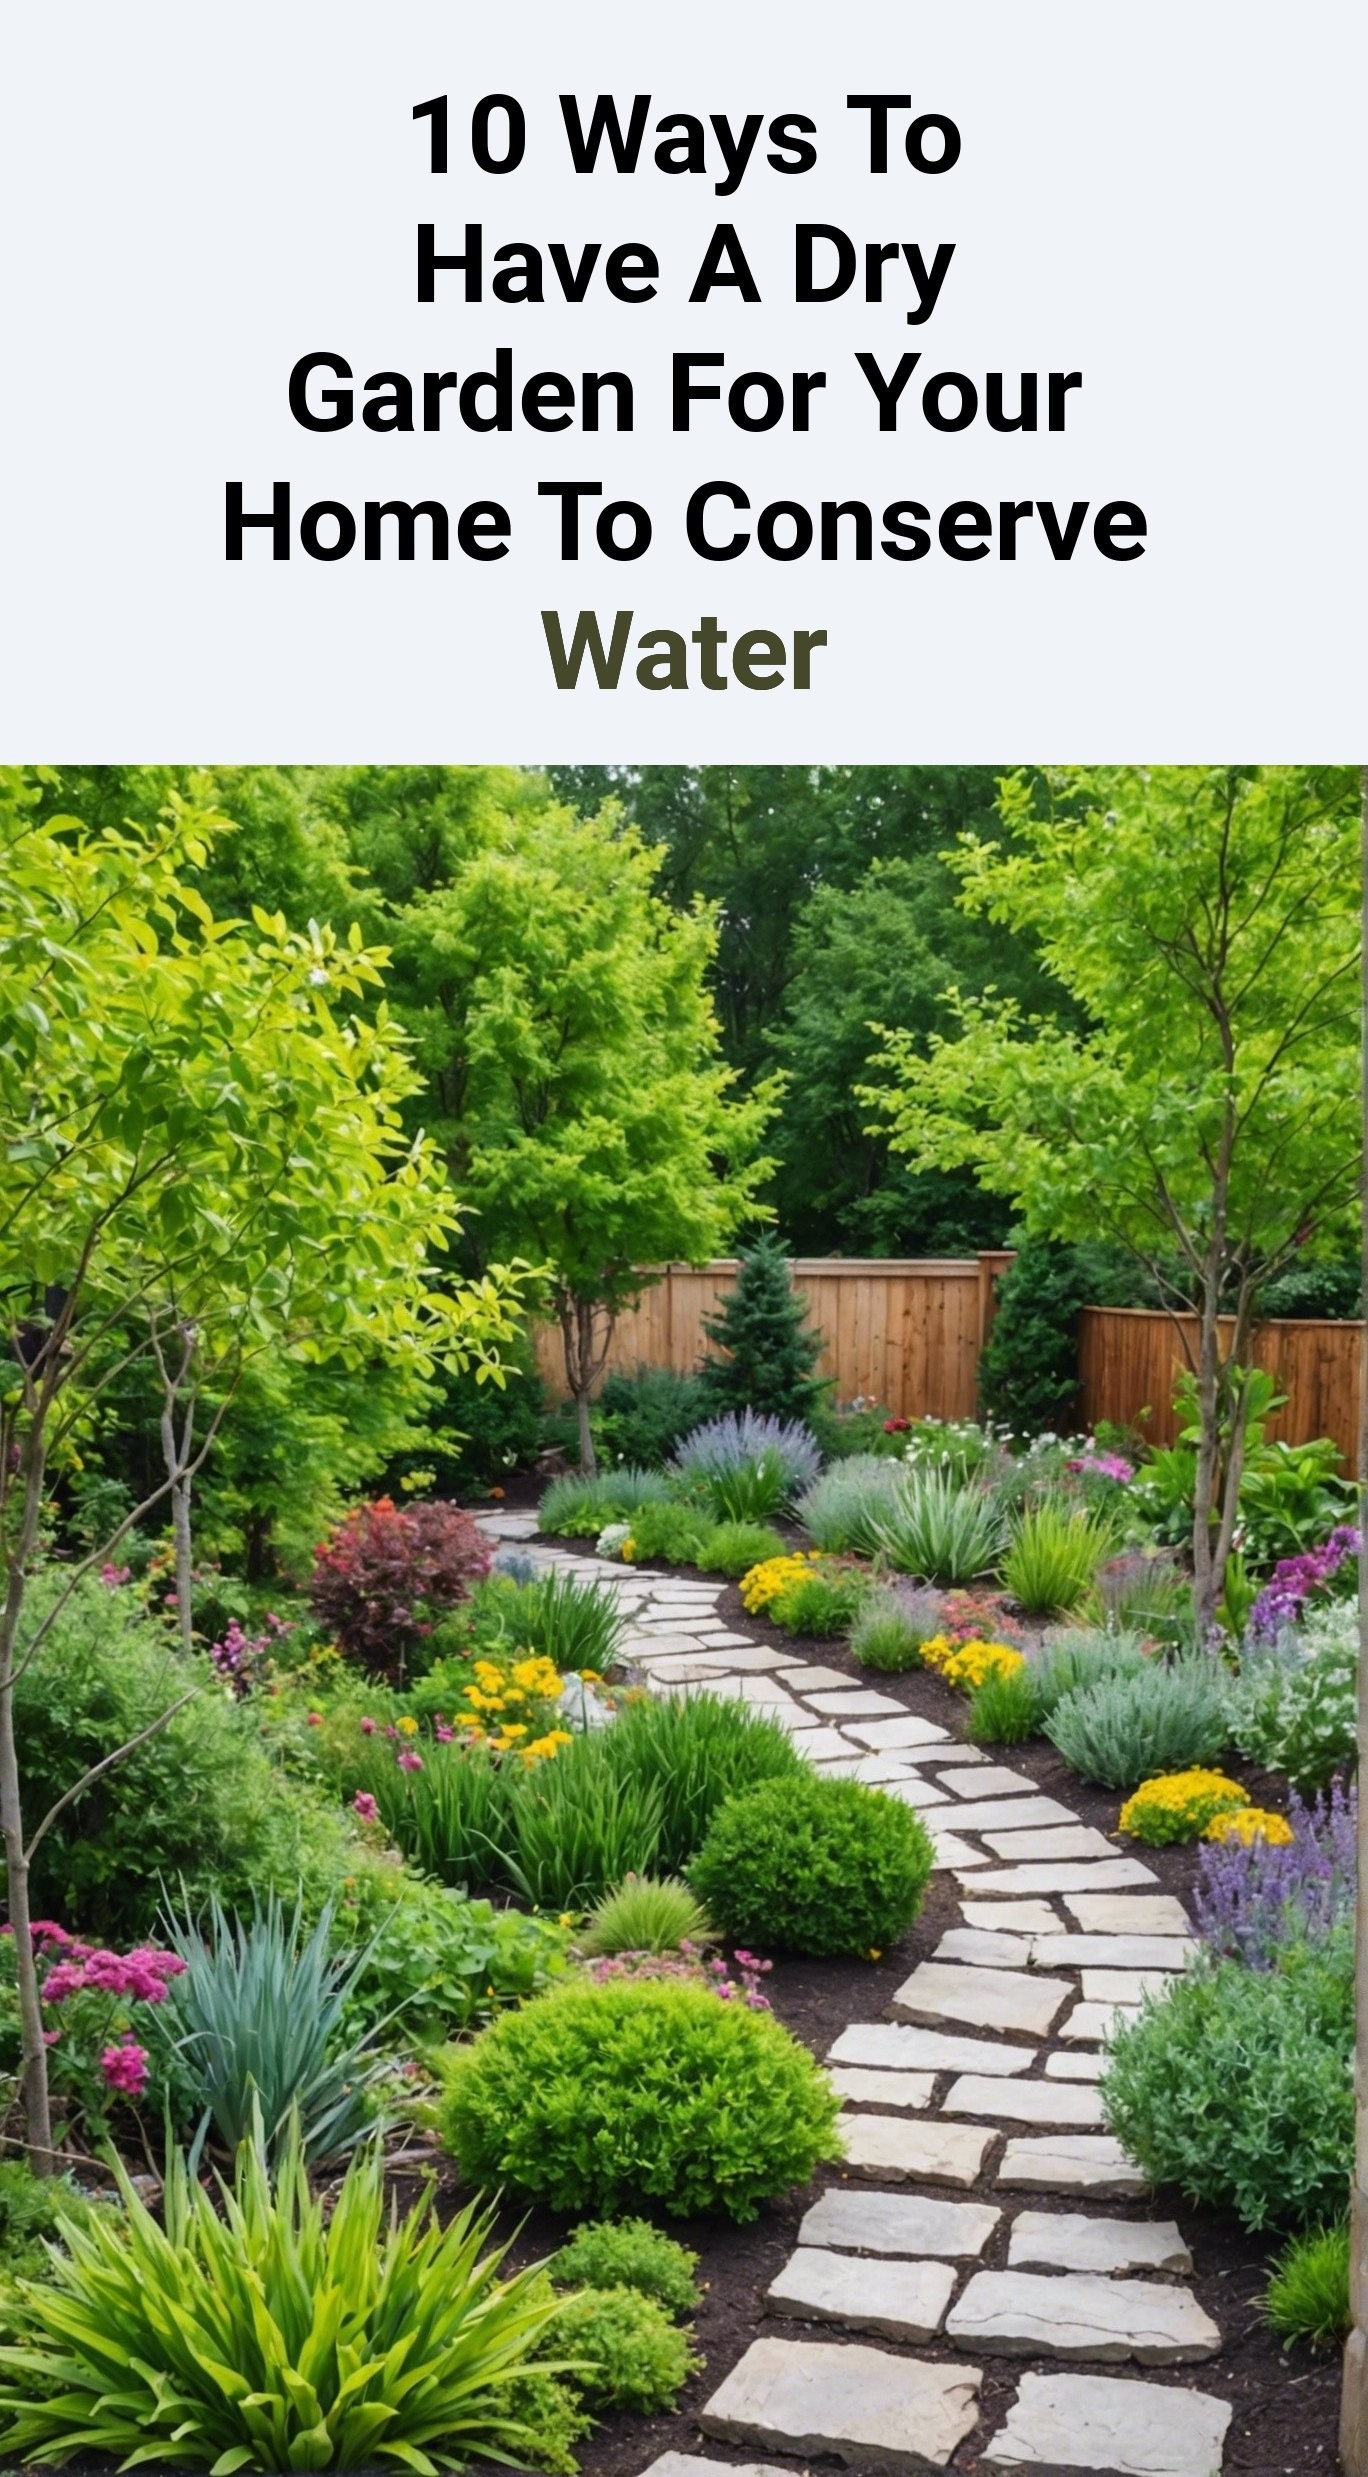 10 Ways To Have A Dry Garden For Your Home To Conserve Water